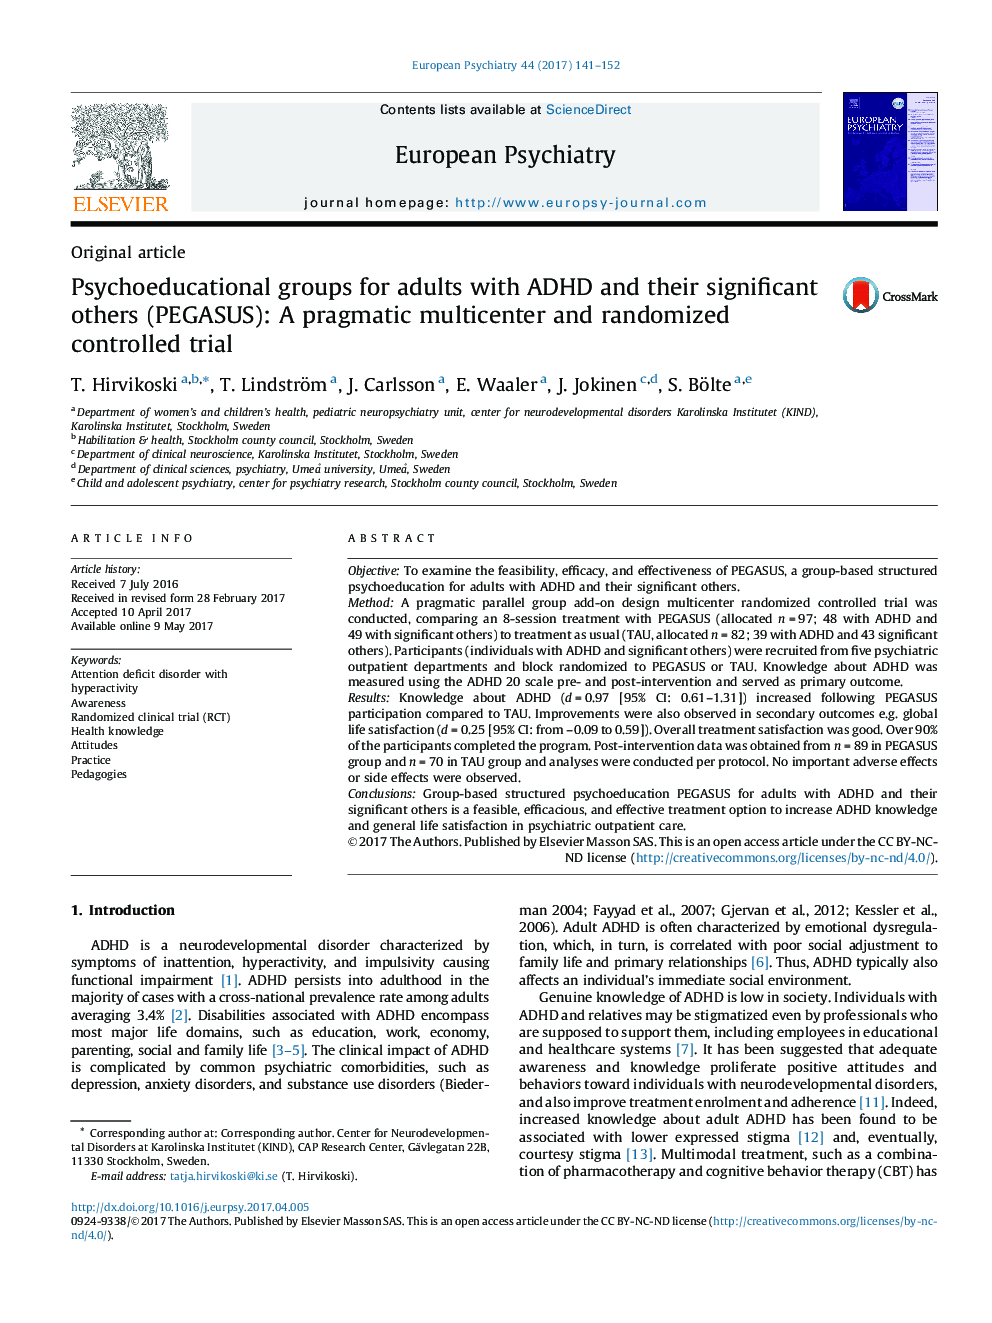 Original articlePsychoeducational groups for adults with ADHD and their significant others (PEGASUS): A pragmatic multicenter and randomized controlled trial